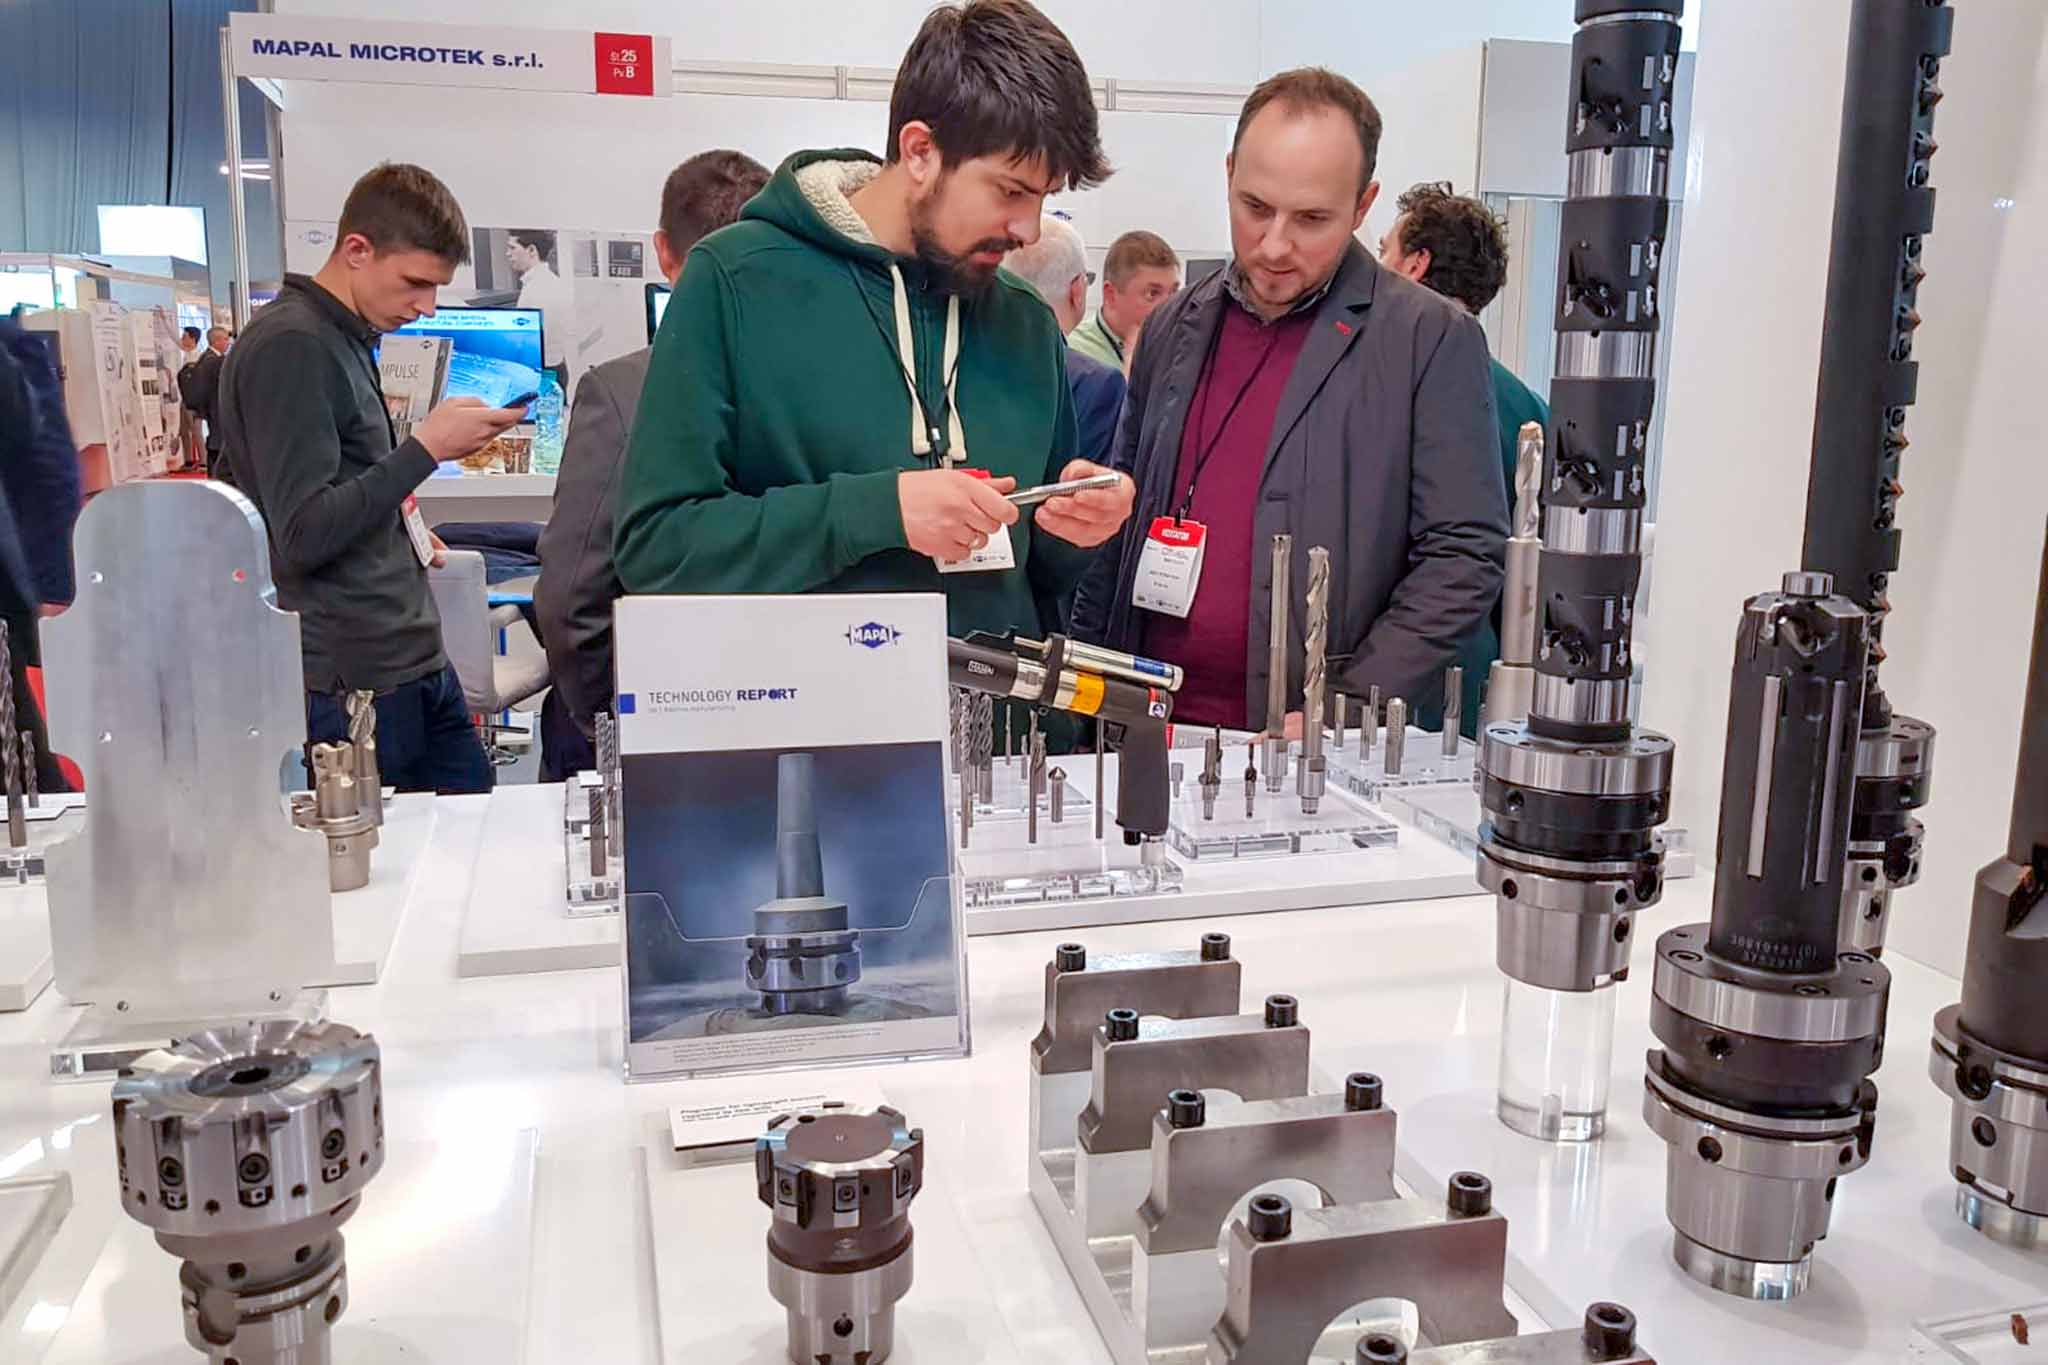 Two trade fair visitors look on with interest at a tool on the MAPAL exhibition stand.